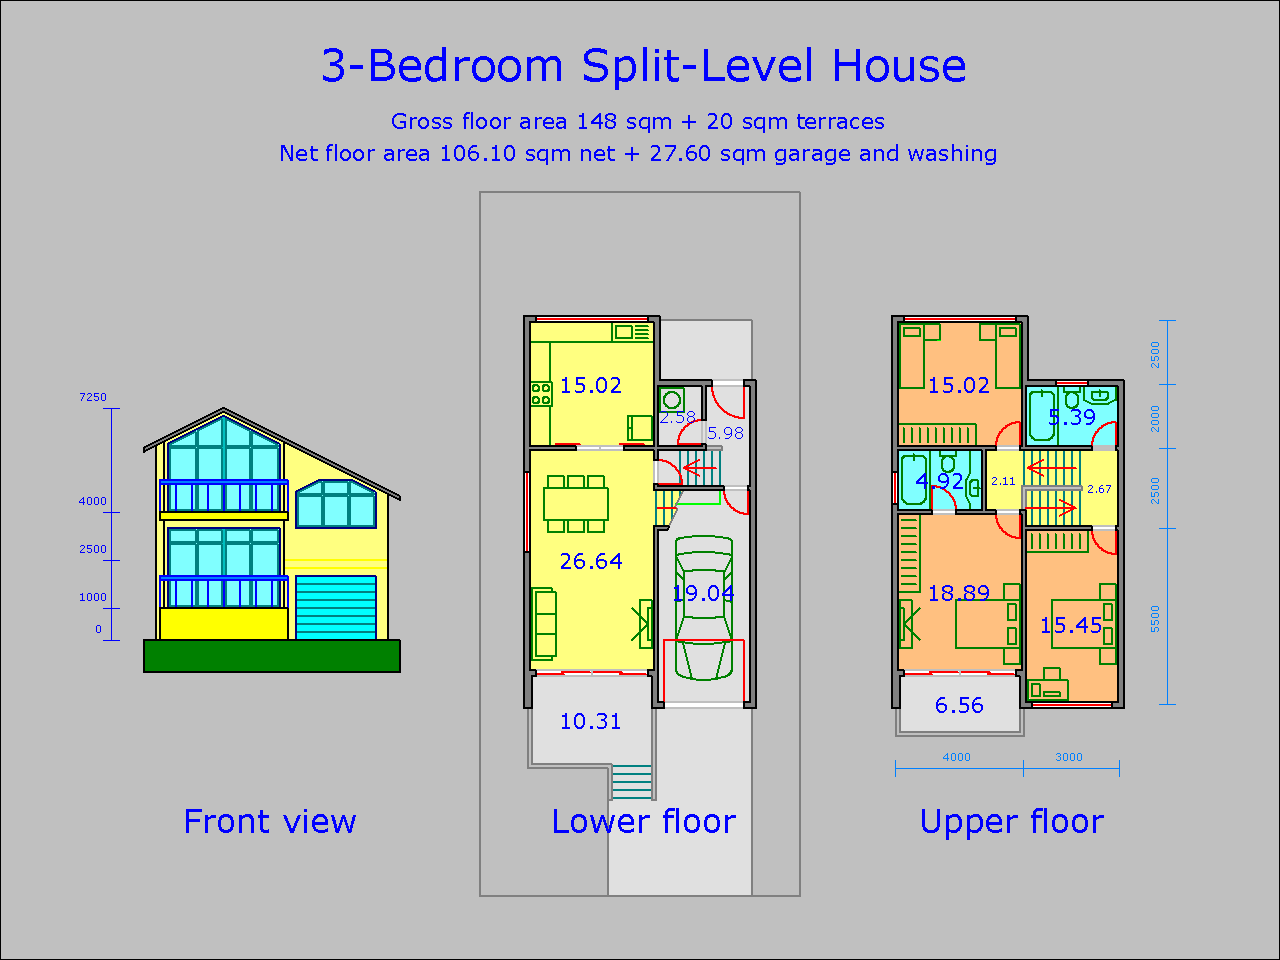 Split-level home with 3 bedrooms and garage